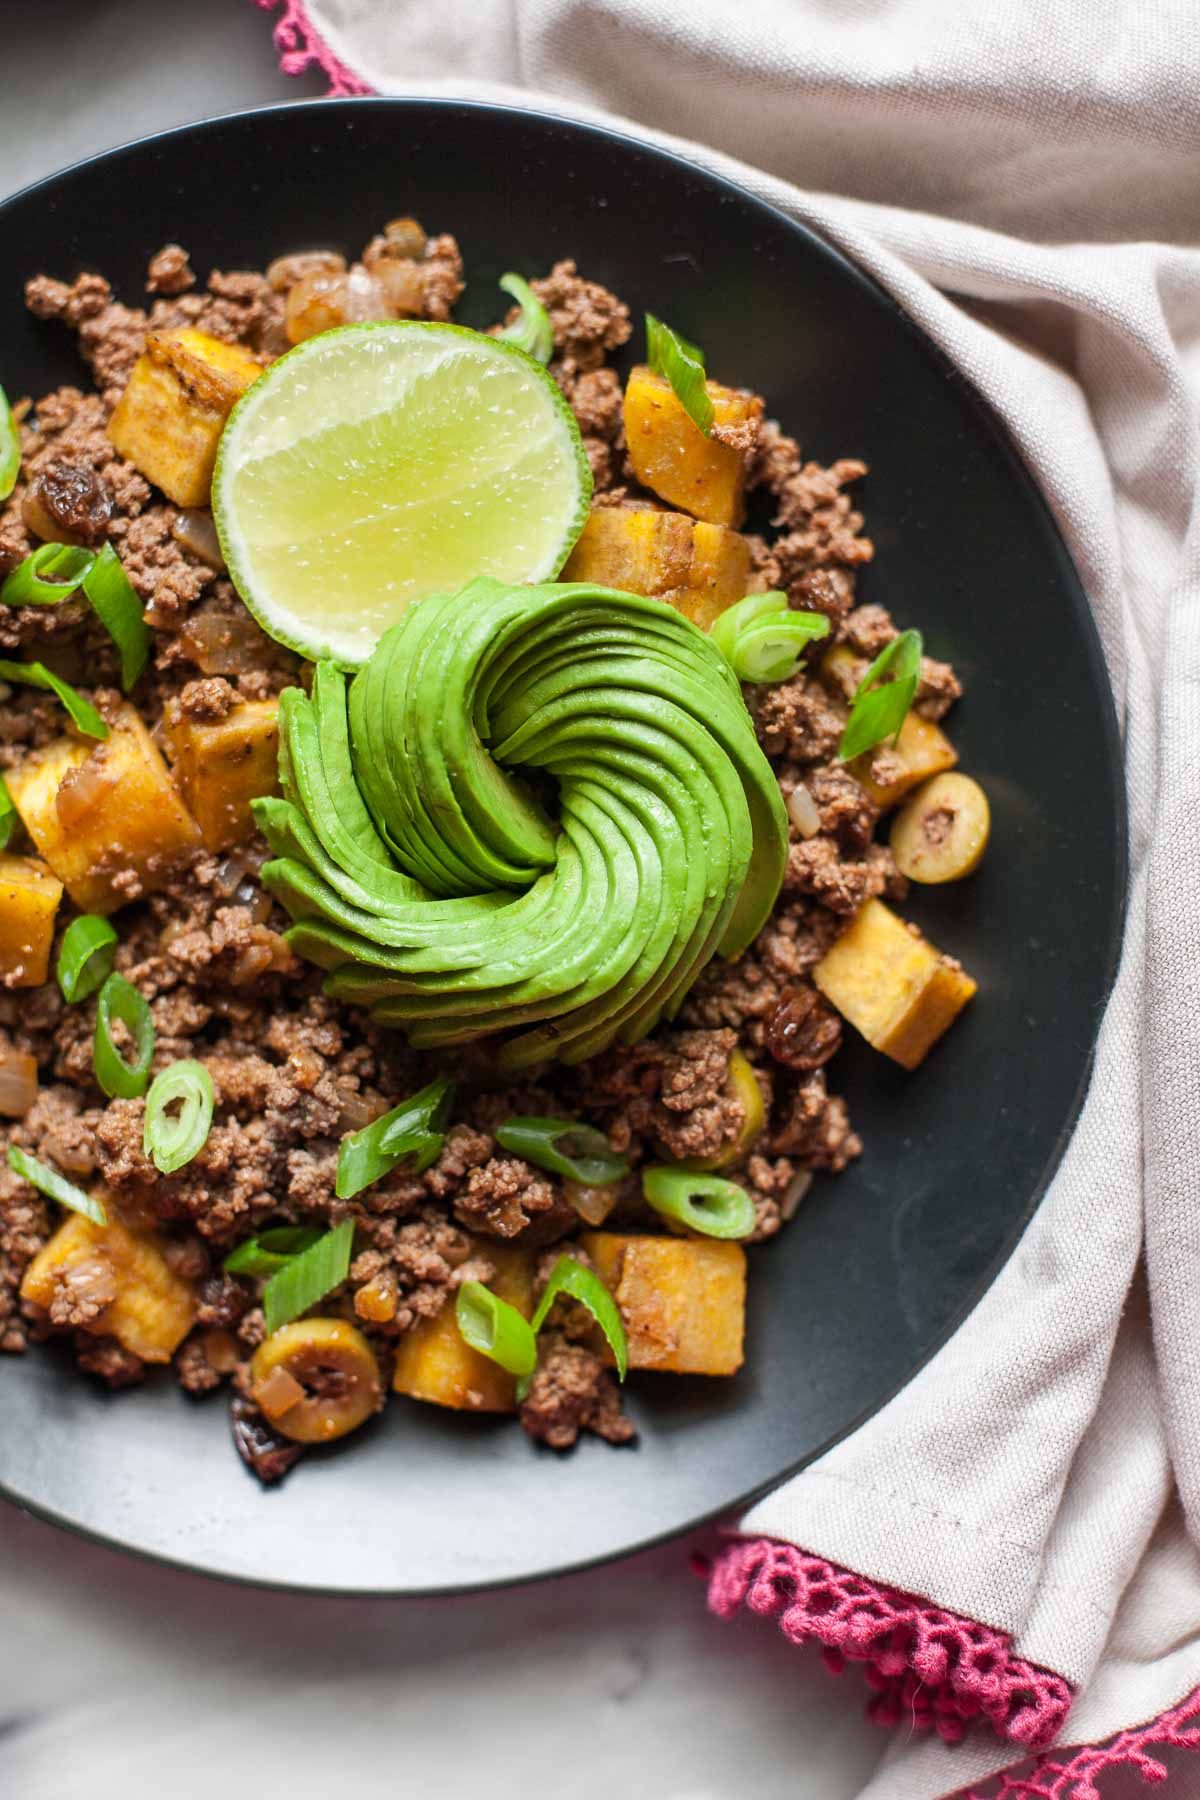 Top 16 Paleo Recipes of 2016: Picadillo with Plantains